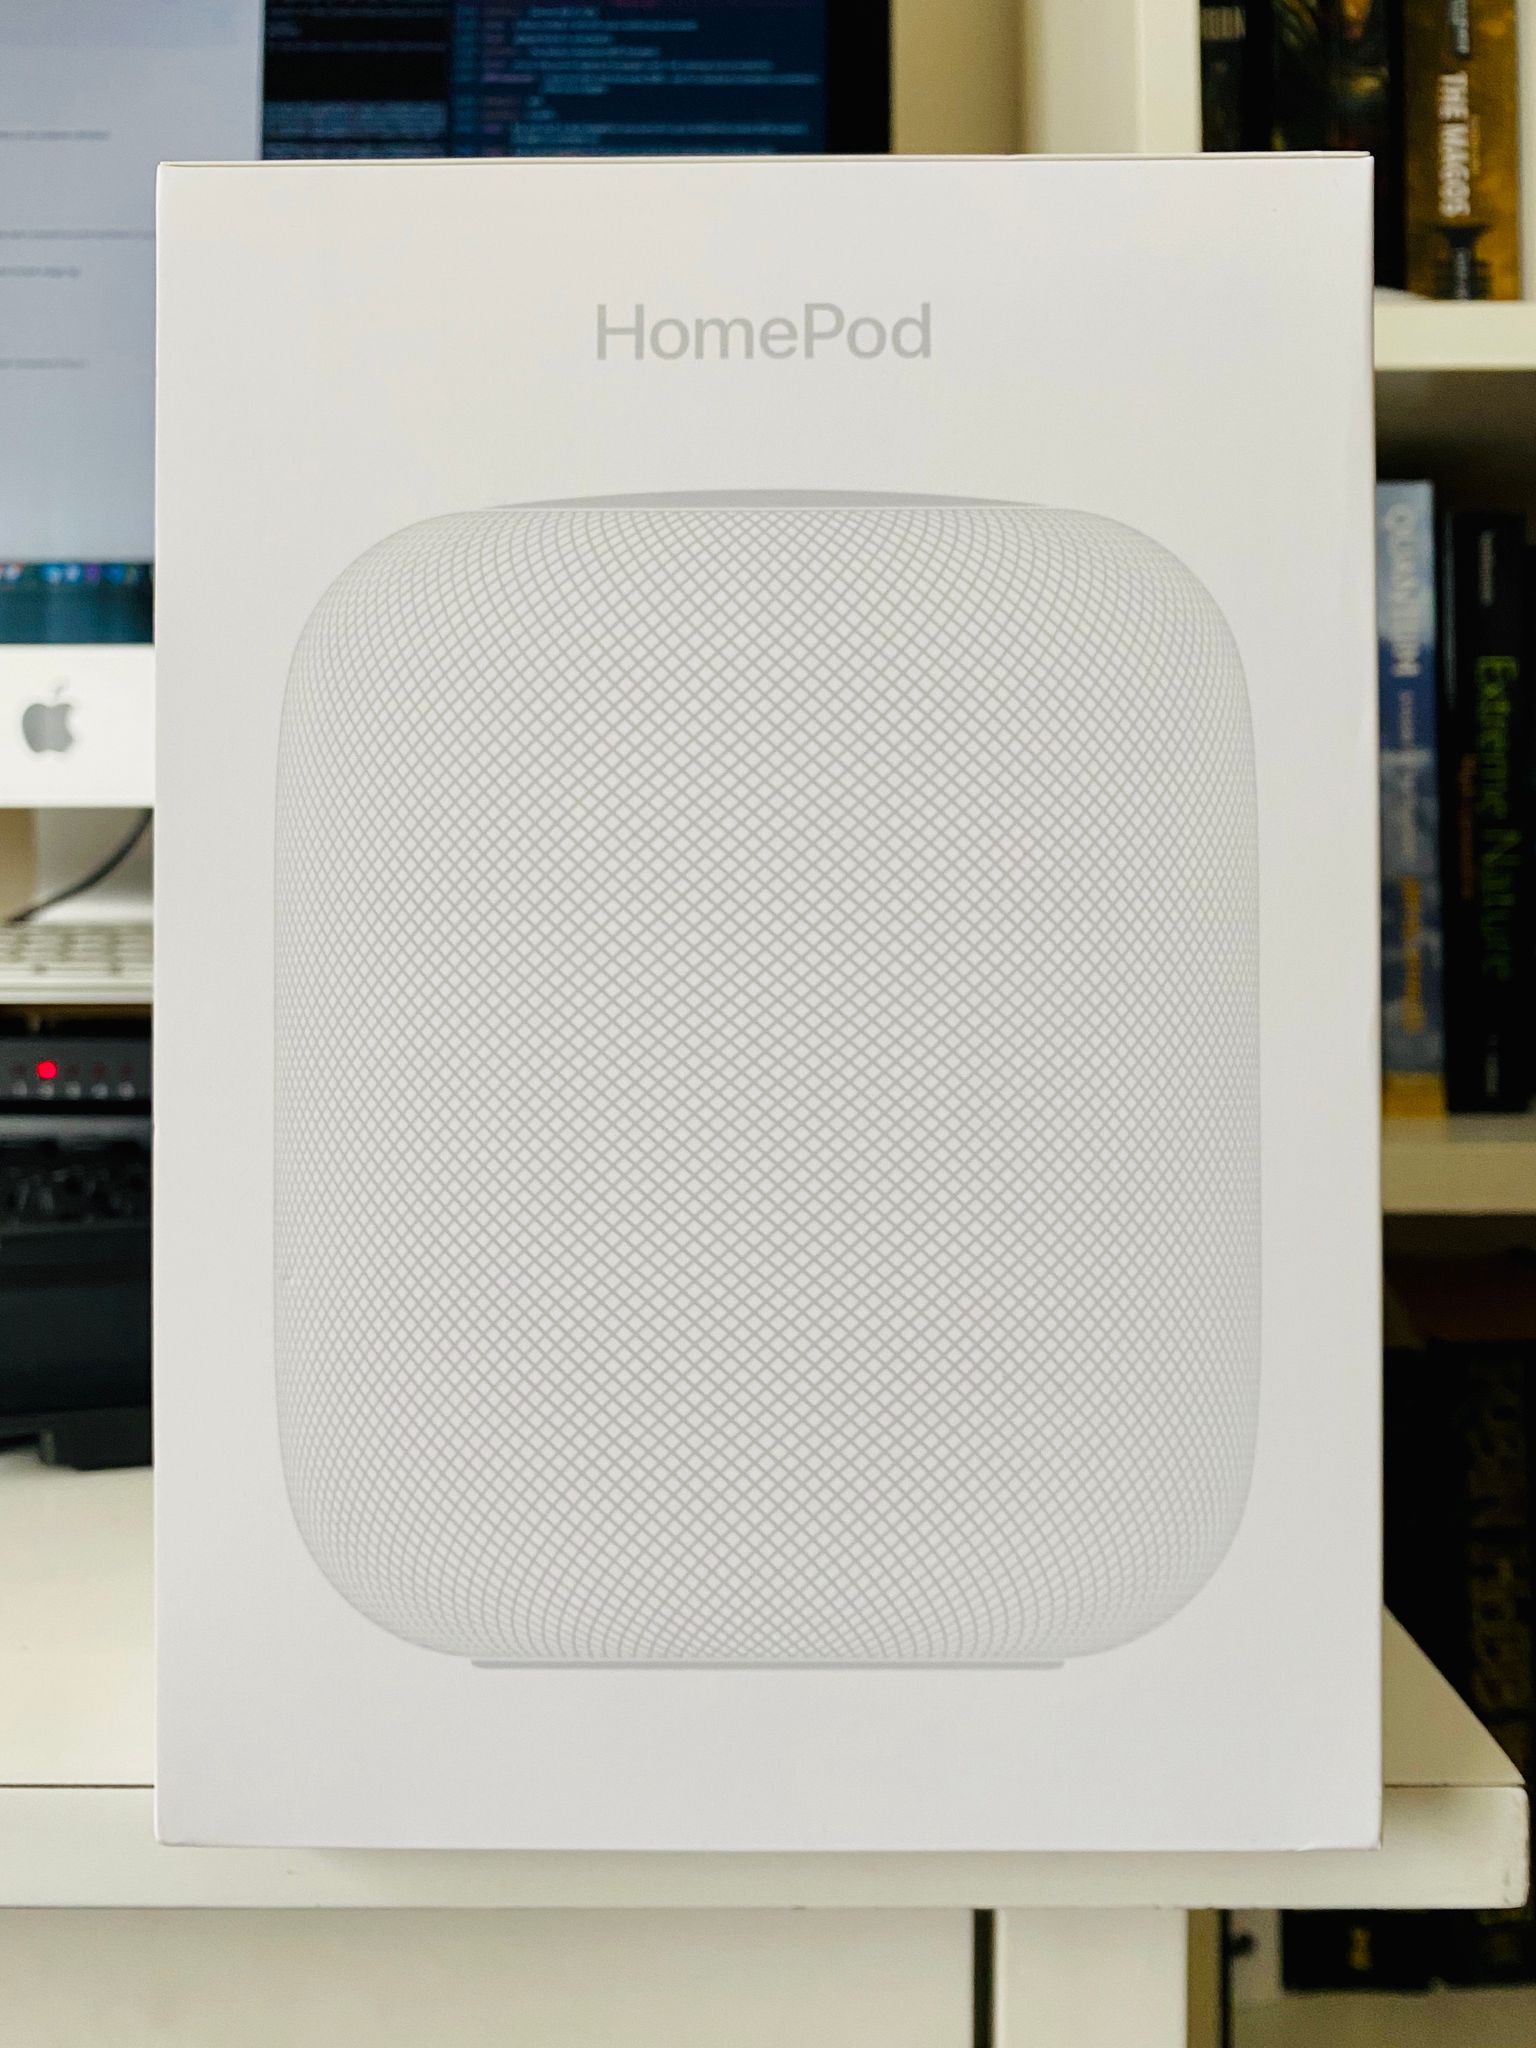 A photo of the box of a white Apple HomePod.